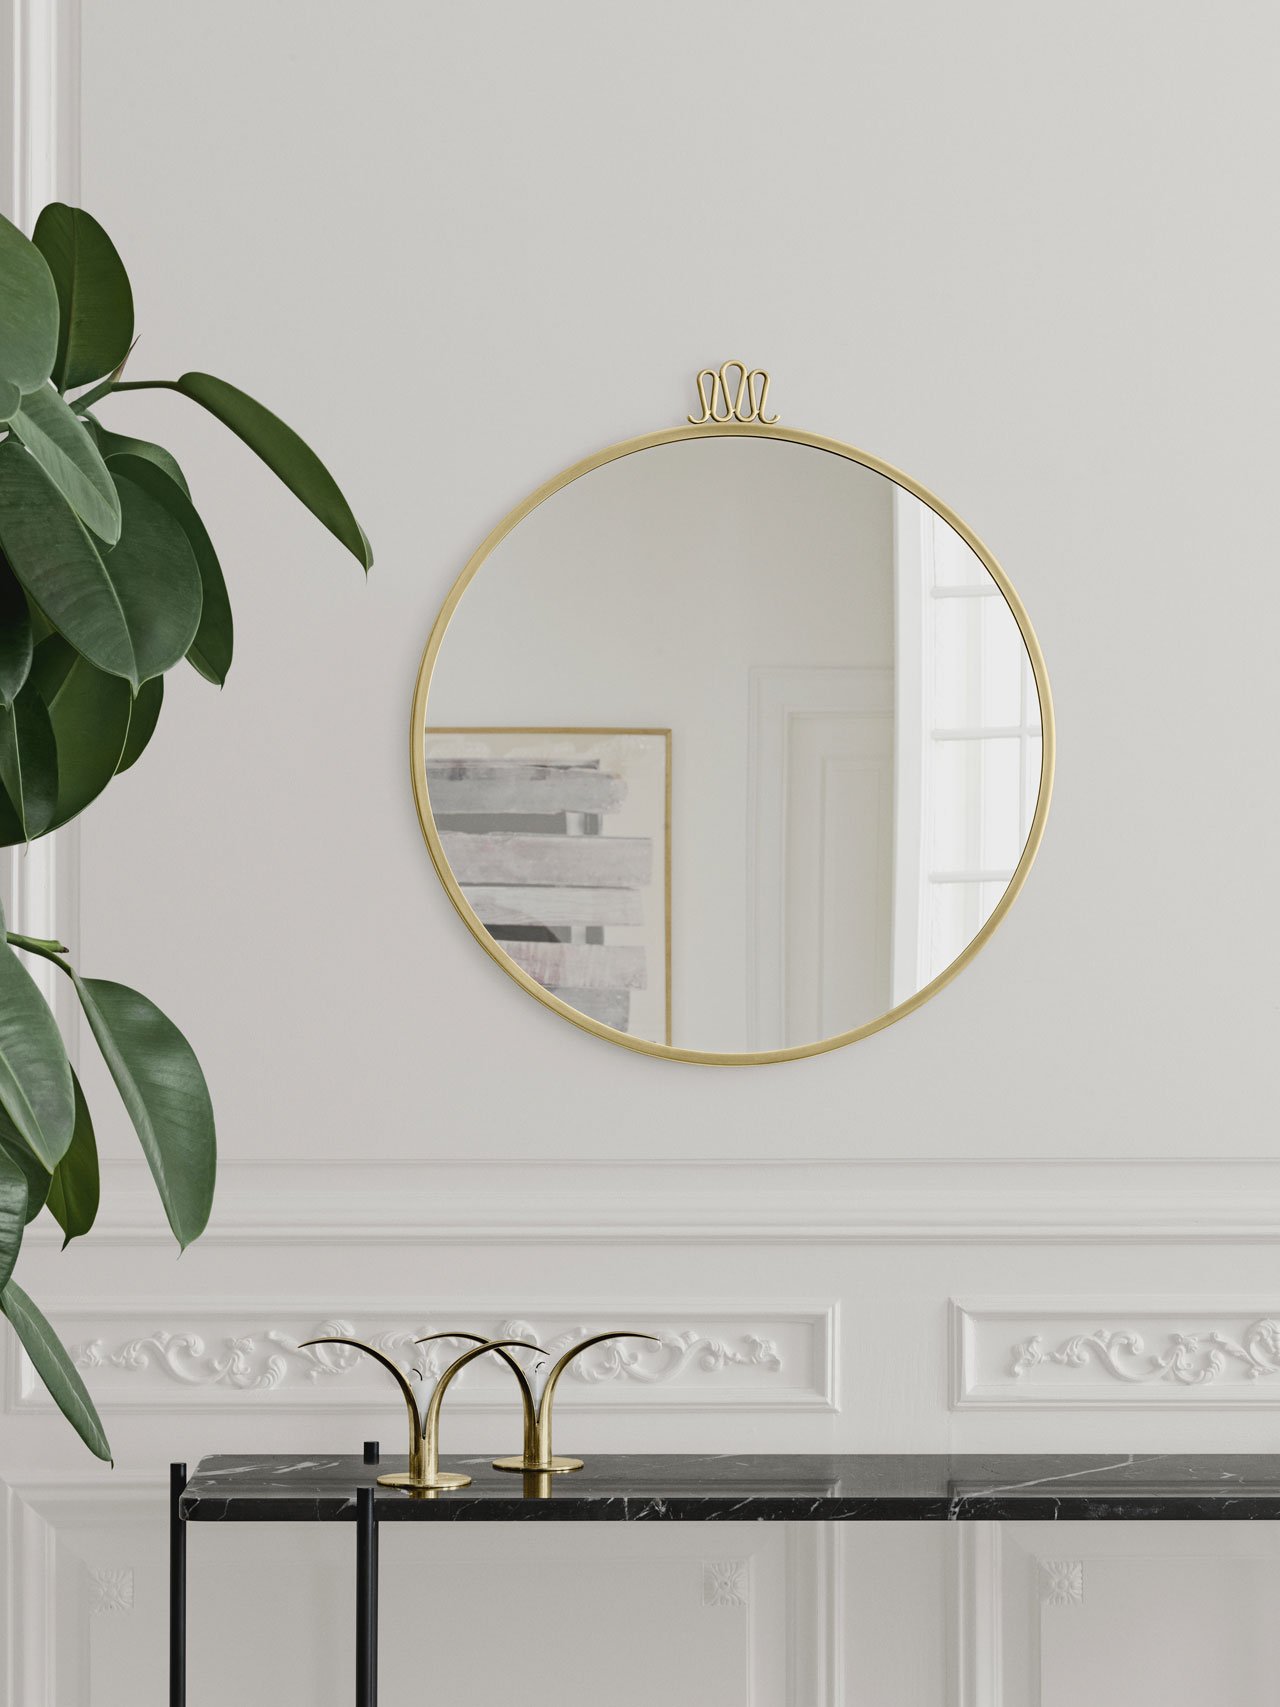 One of Gio Ponti's signature designs is the Randaccio mirror from 1925. ''Designed for his own home on Via Randaccio in Milano, his very first architectural project, the Randaccio mirror decorated the walls in his bedroom on the 3rd floor together with other furniture designed especially for the apartment.'' Since 2015 the mirror is reproduced by Gubi.